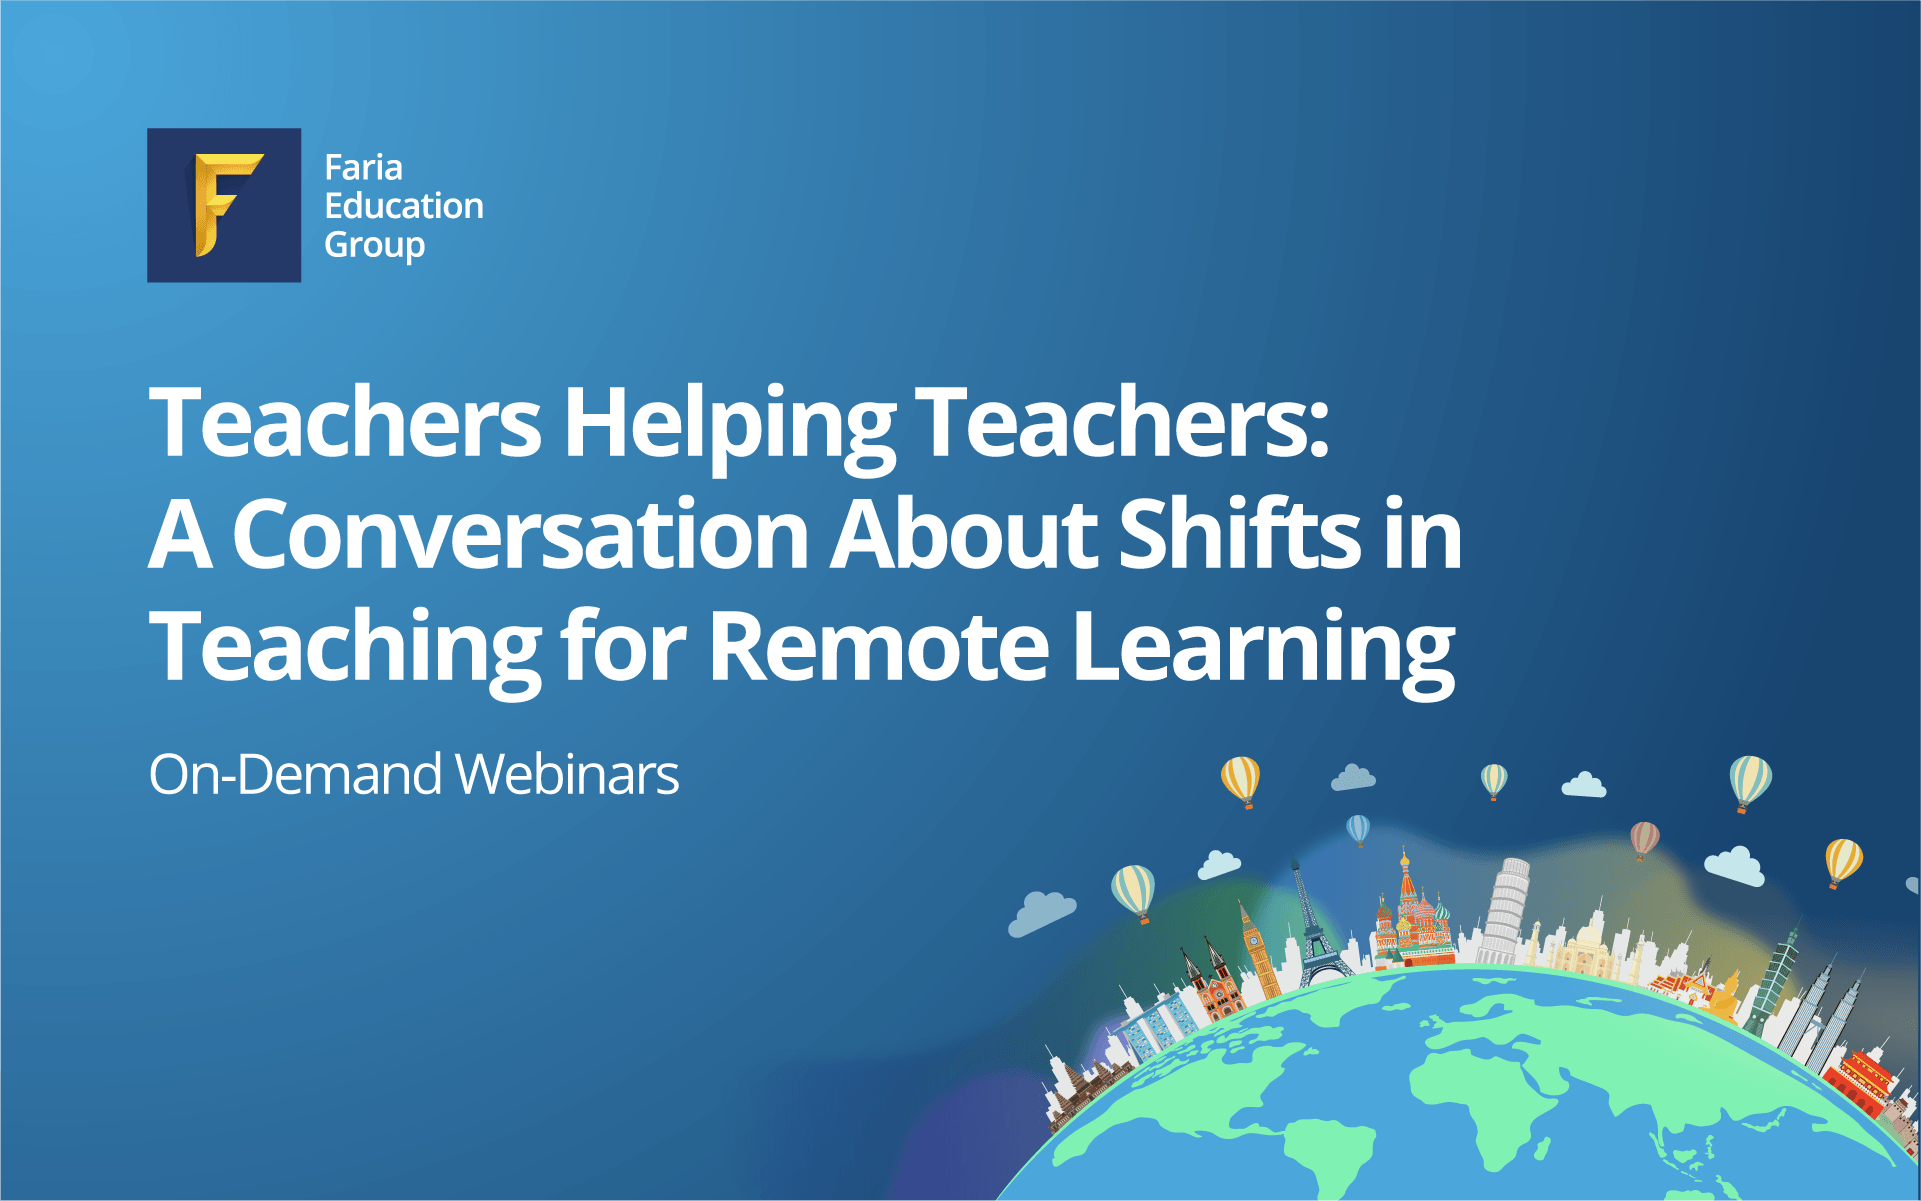 Teachers Helping Teachers: A Conversation about Shifts in Teaching for Remote Learning